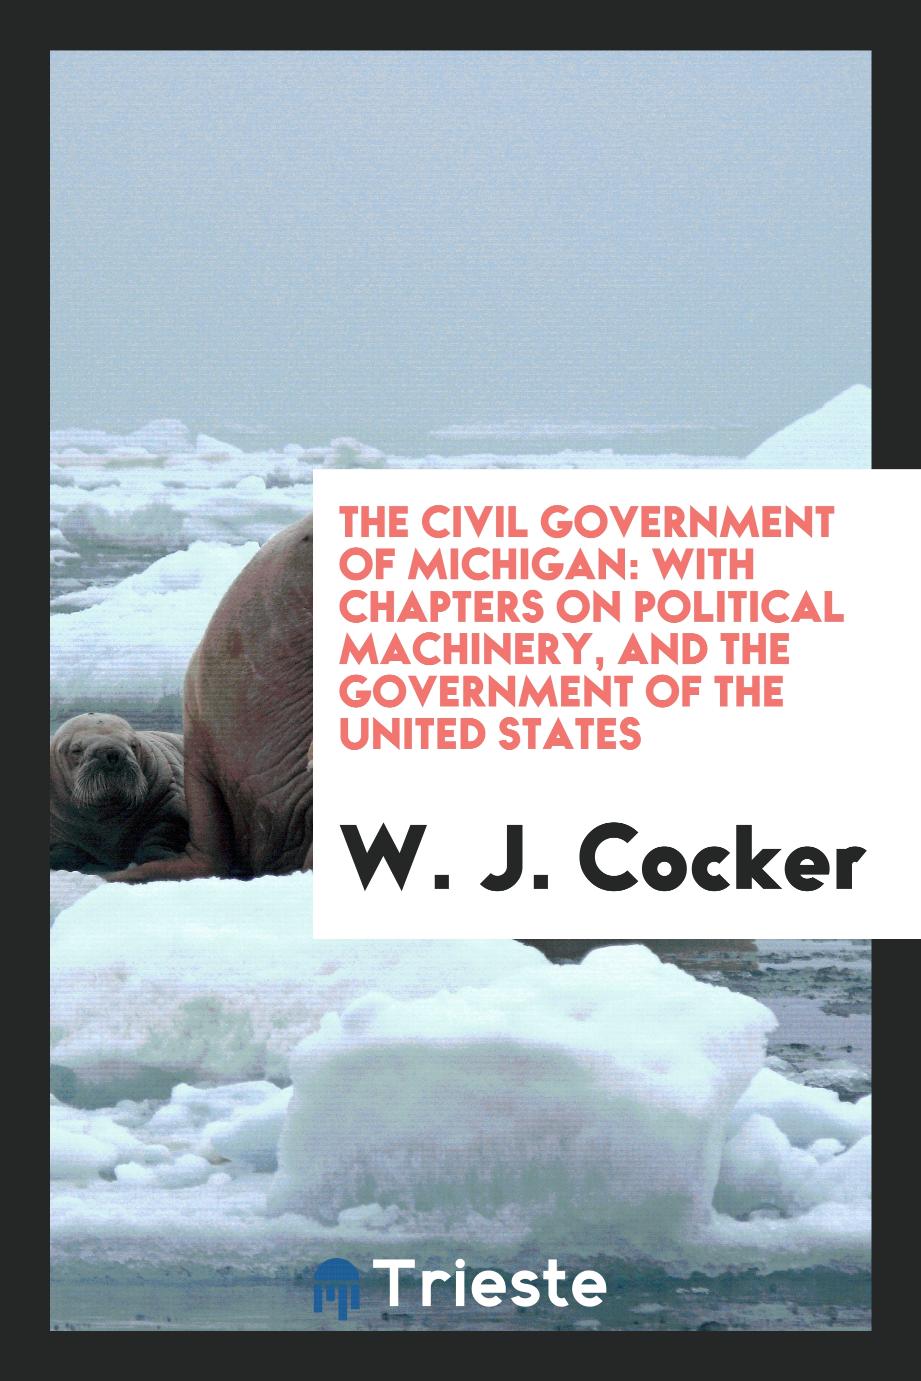 The Civil Government of Michigan: With Chapters on Political Machinery, and the Government of the United States